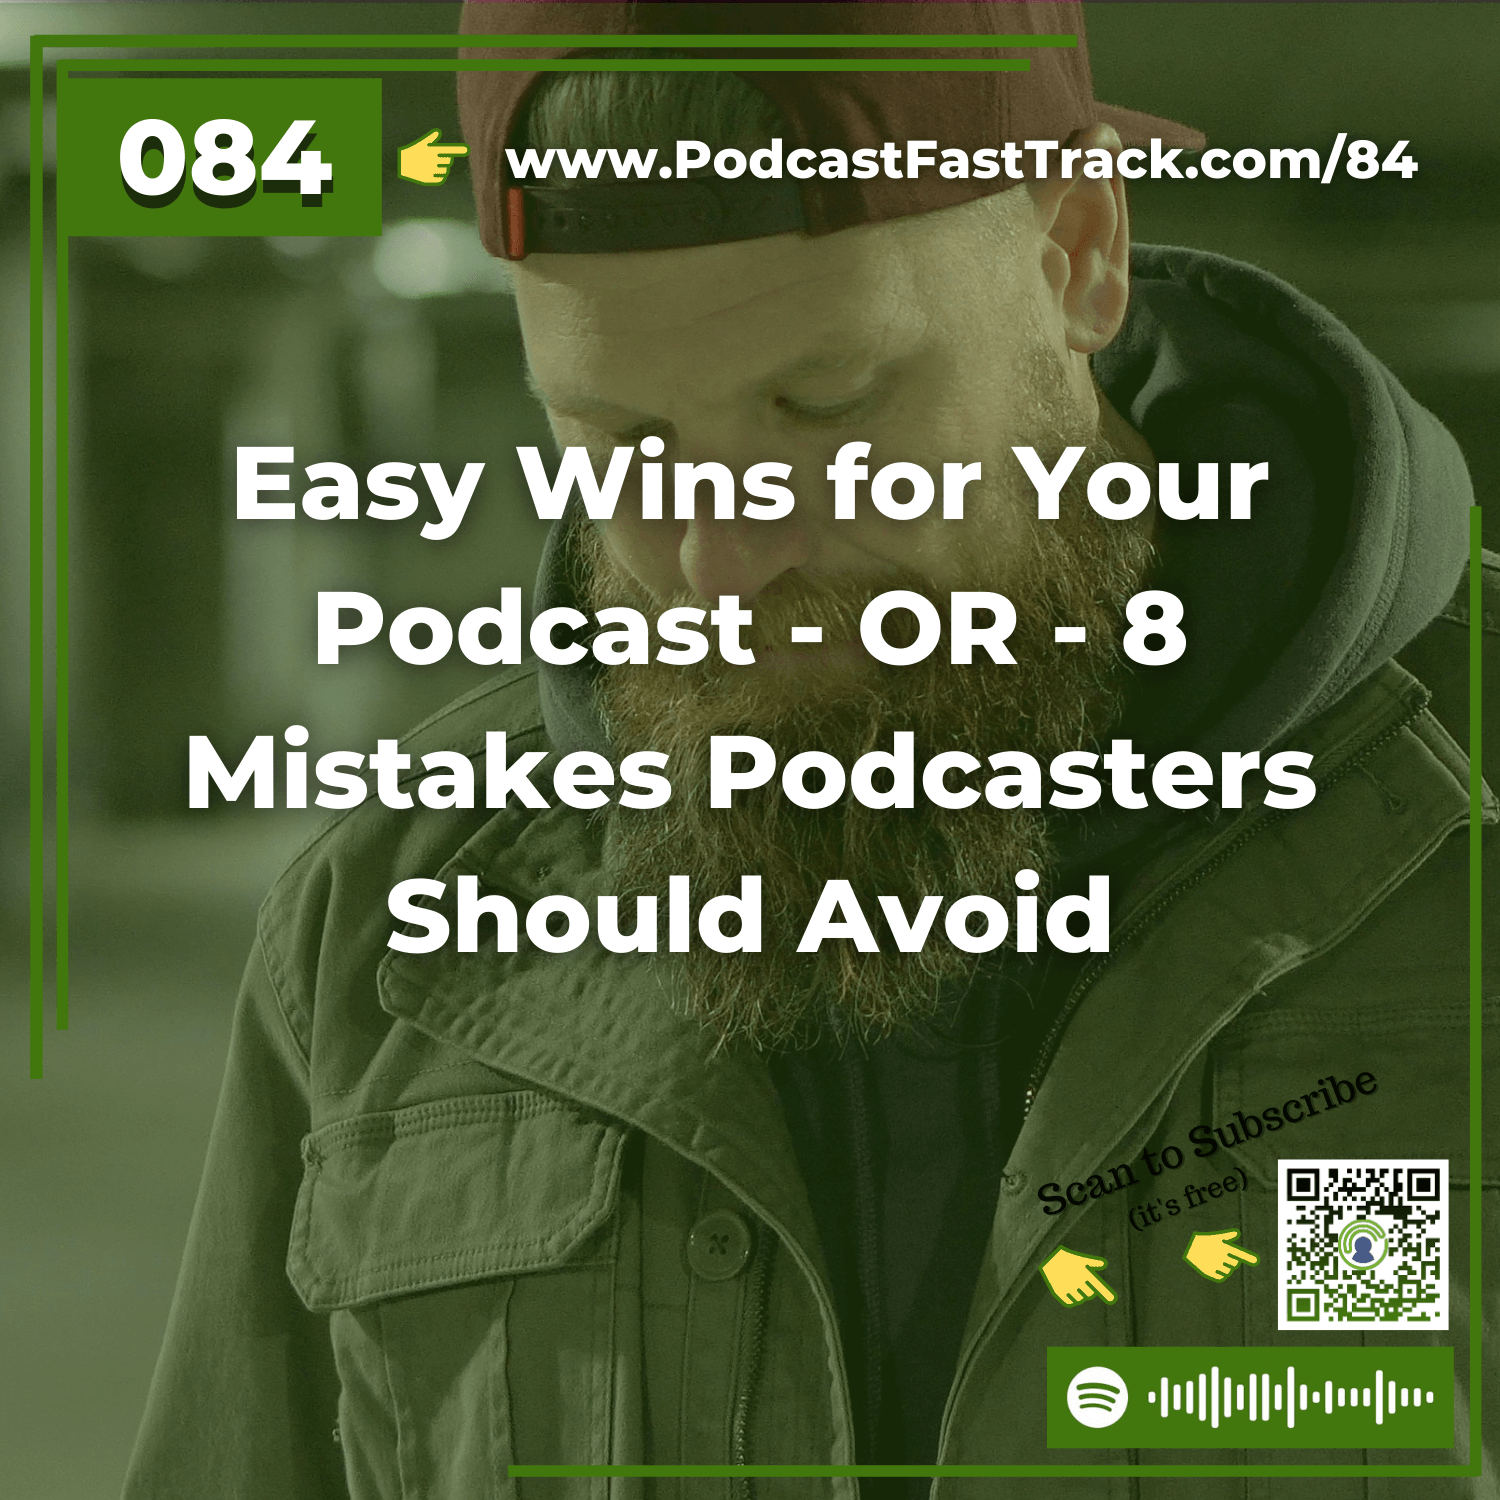 84: Easy Wins for Your Podcast - OR - 8 Mistakes Podcasters Should Avoid